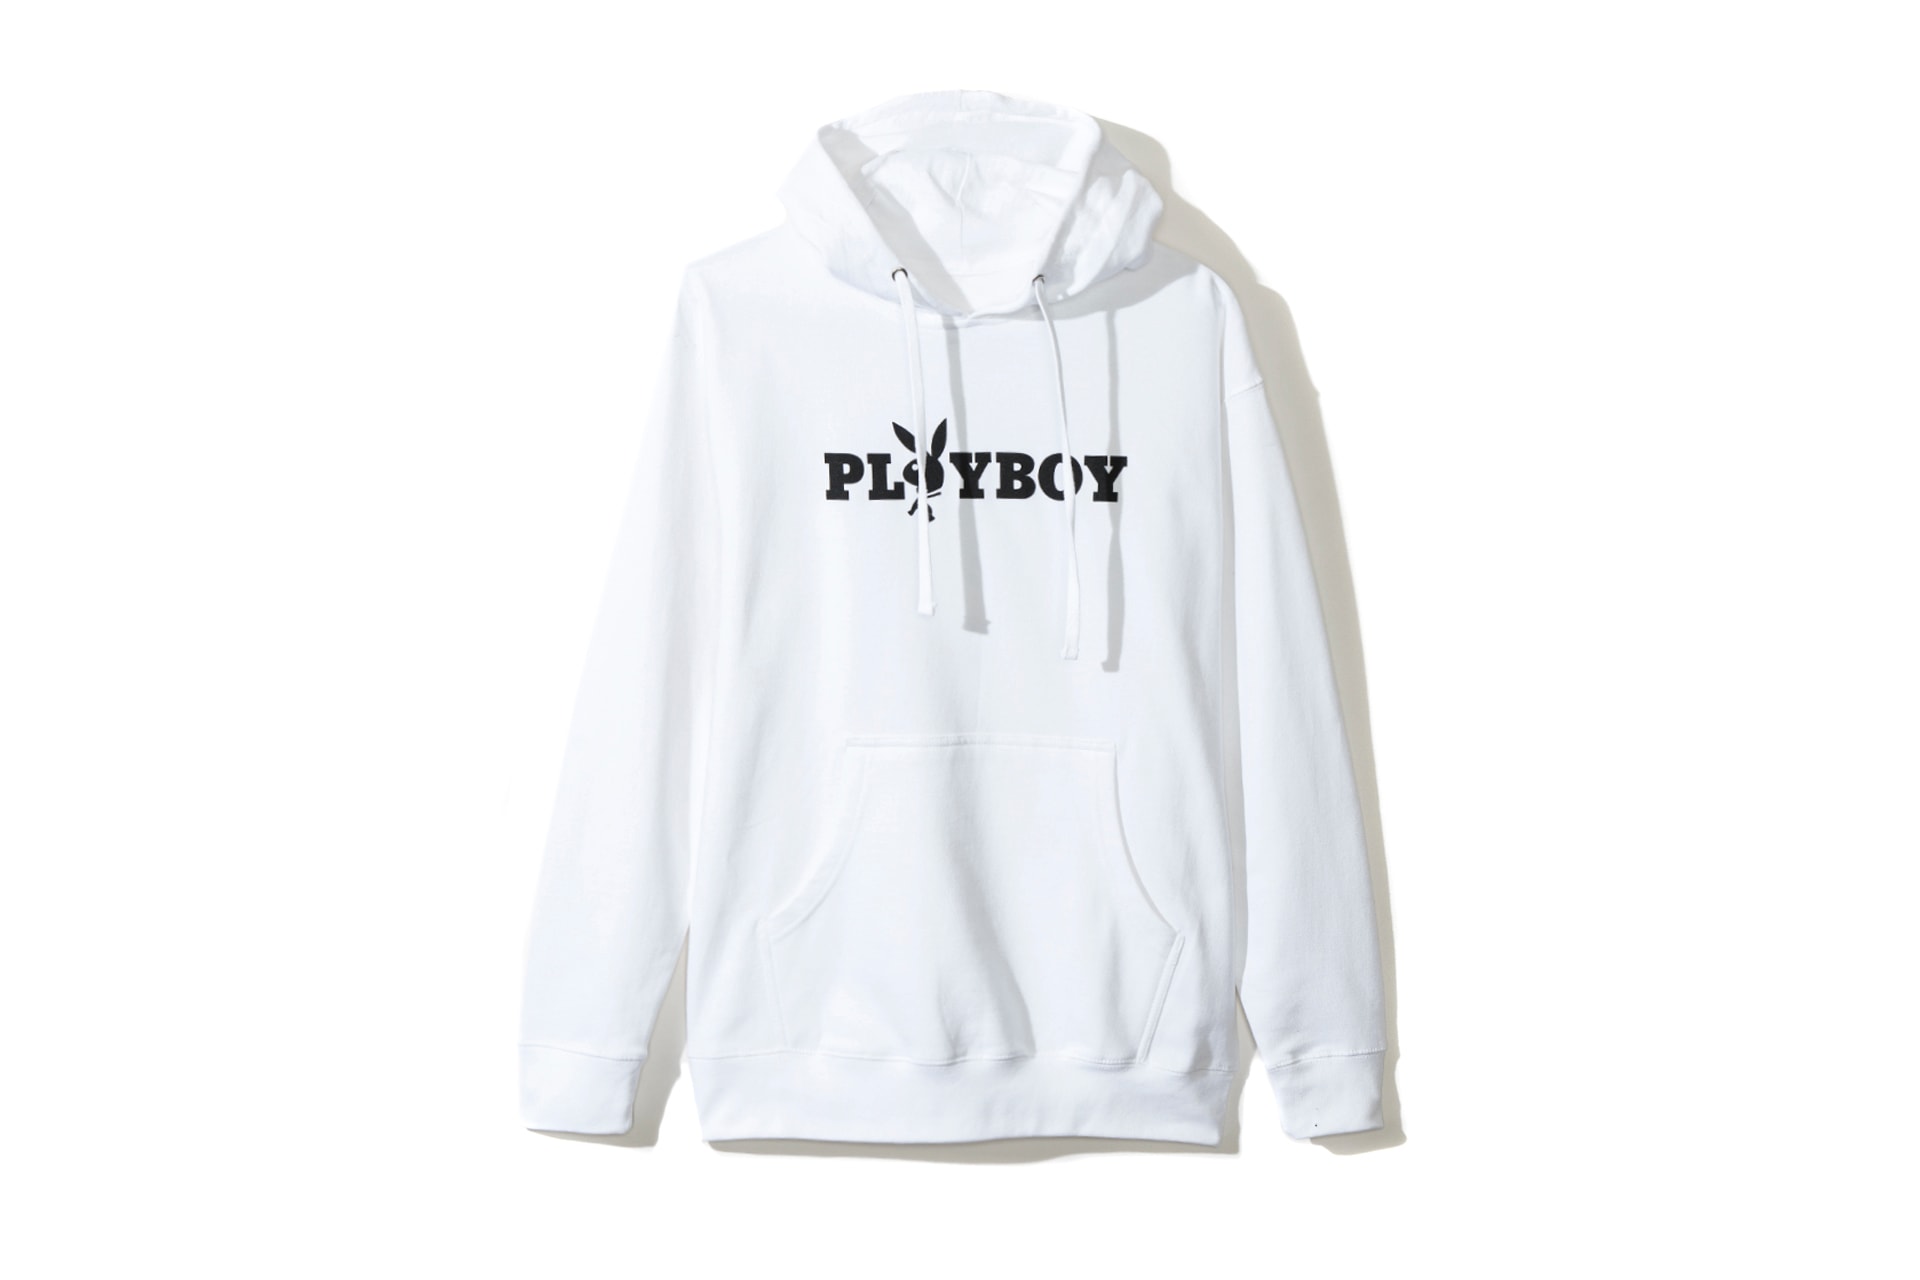 playboy white label anti social social club collaboration collection july 13 2018 white hoodie logo rabbit head bunny